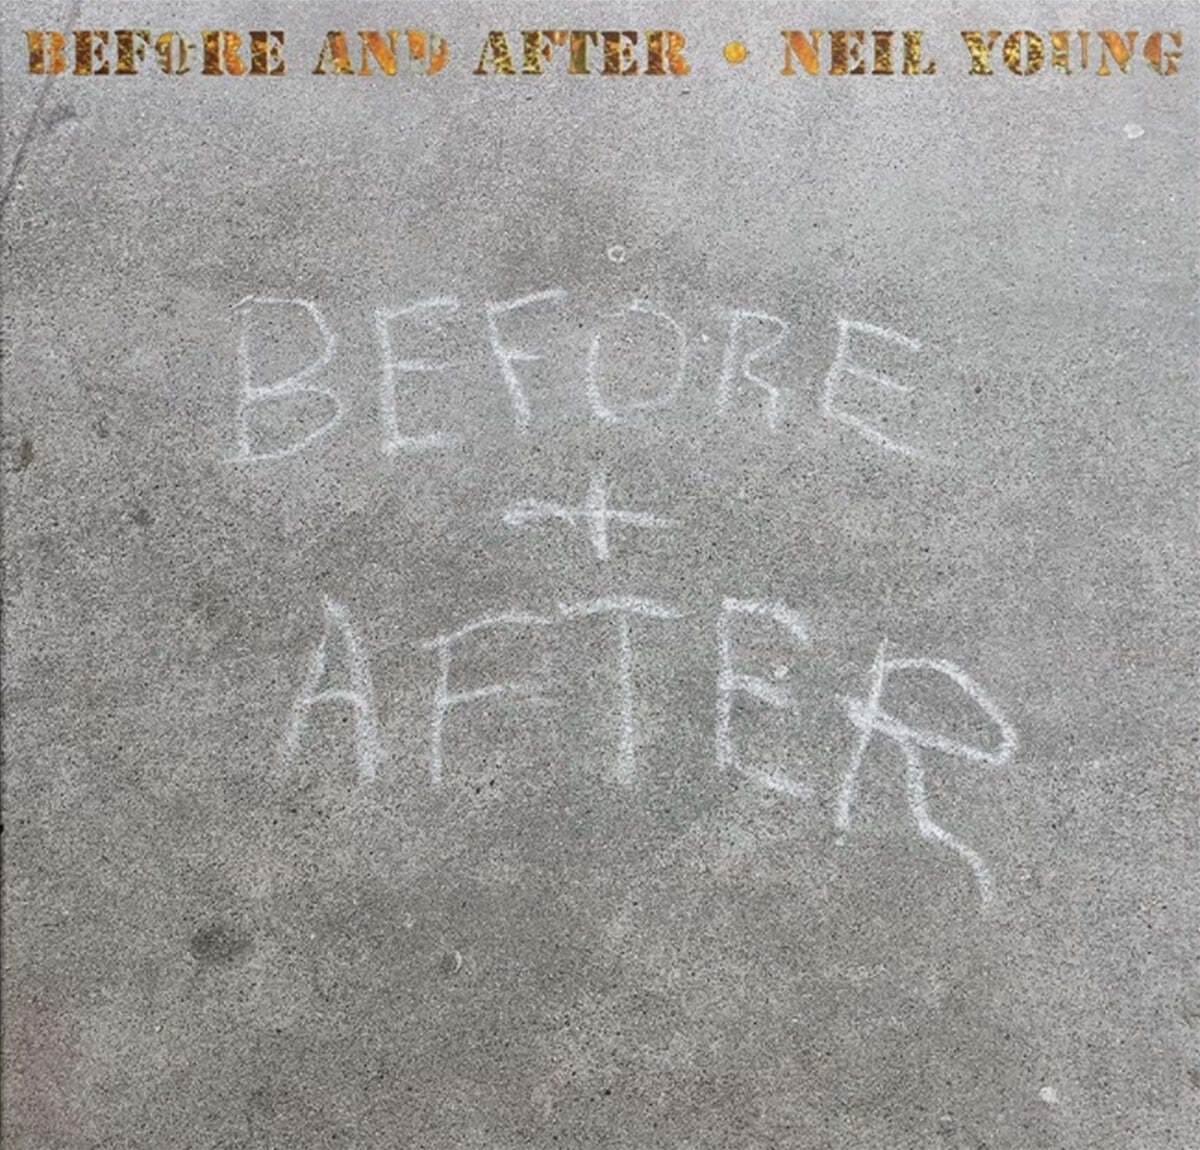 Neil Young (닐 영) - Before and After